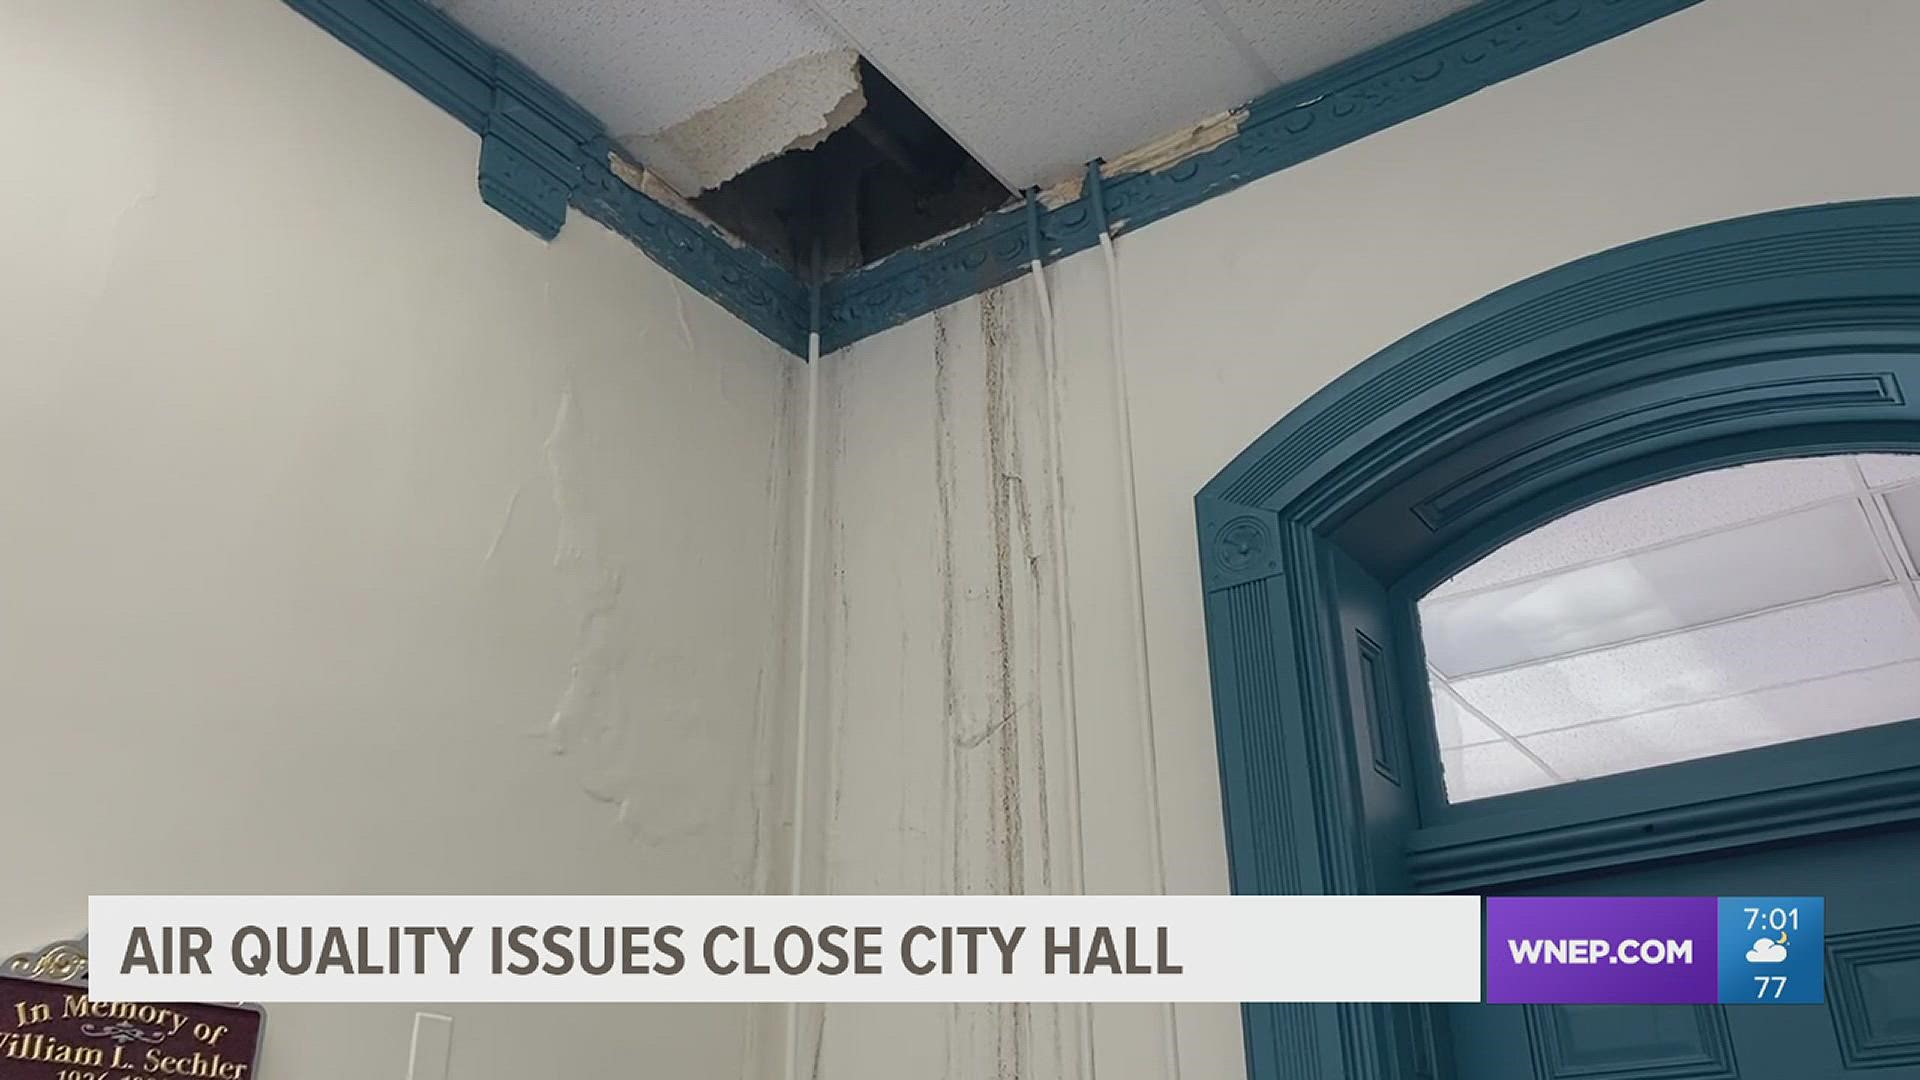 Mold was discovered on all three floors of the building after storms last month.